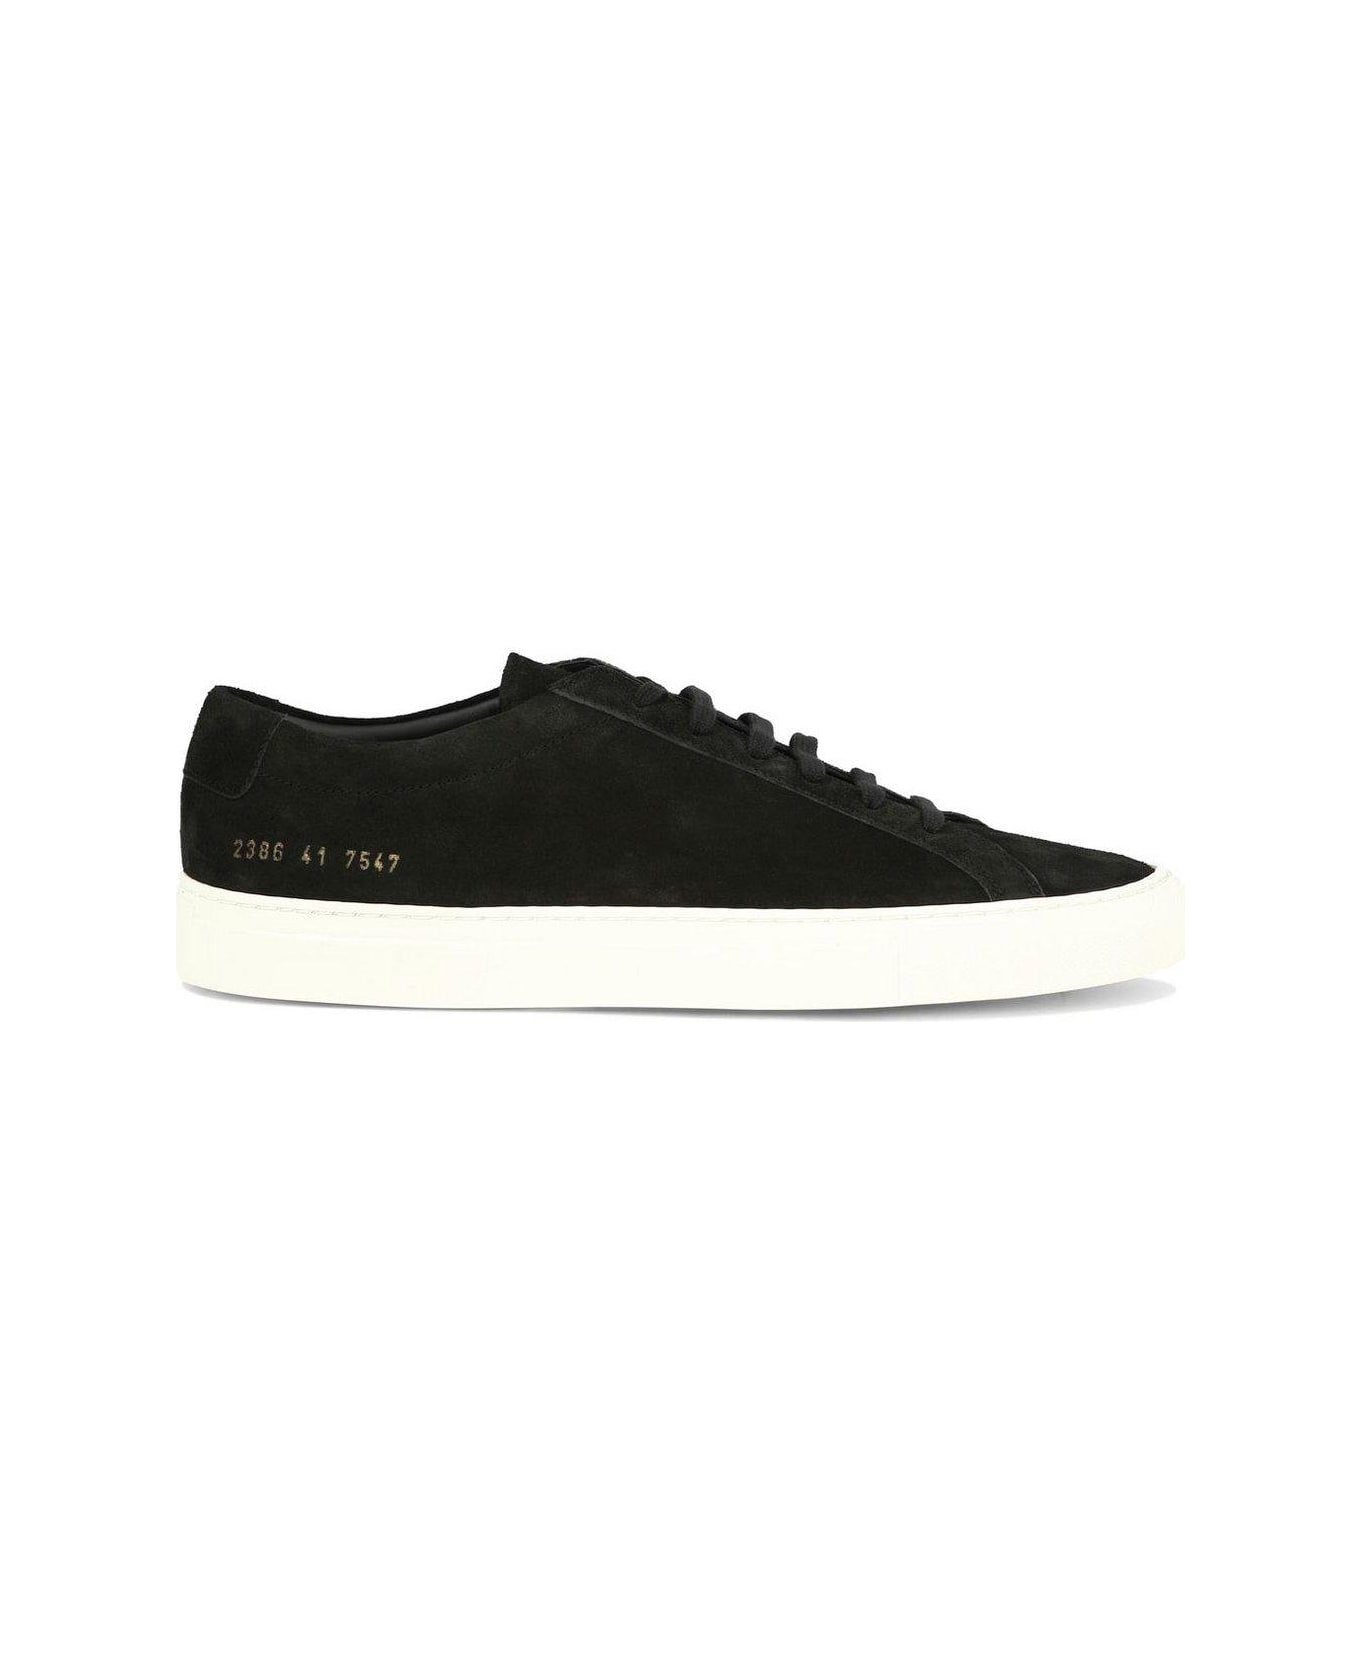 Common Projects Achilles Sneakers In Black Suede - Black スニーカー